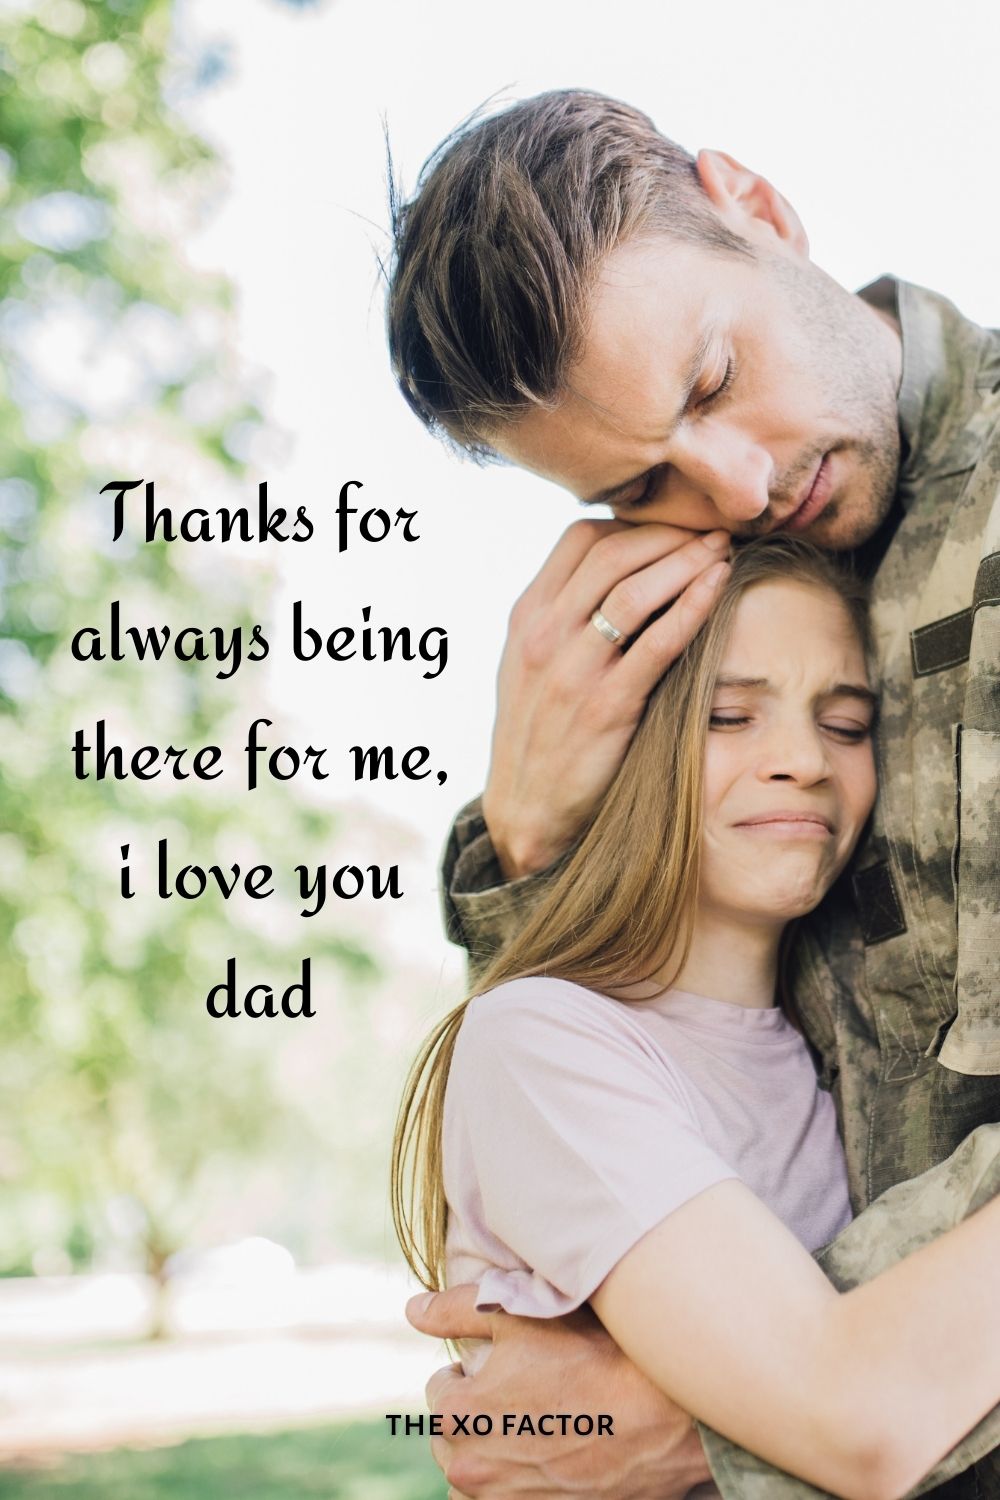 Thanks for always being there for me, i love you dad